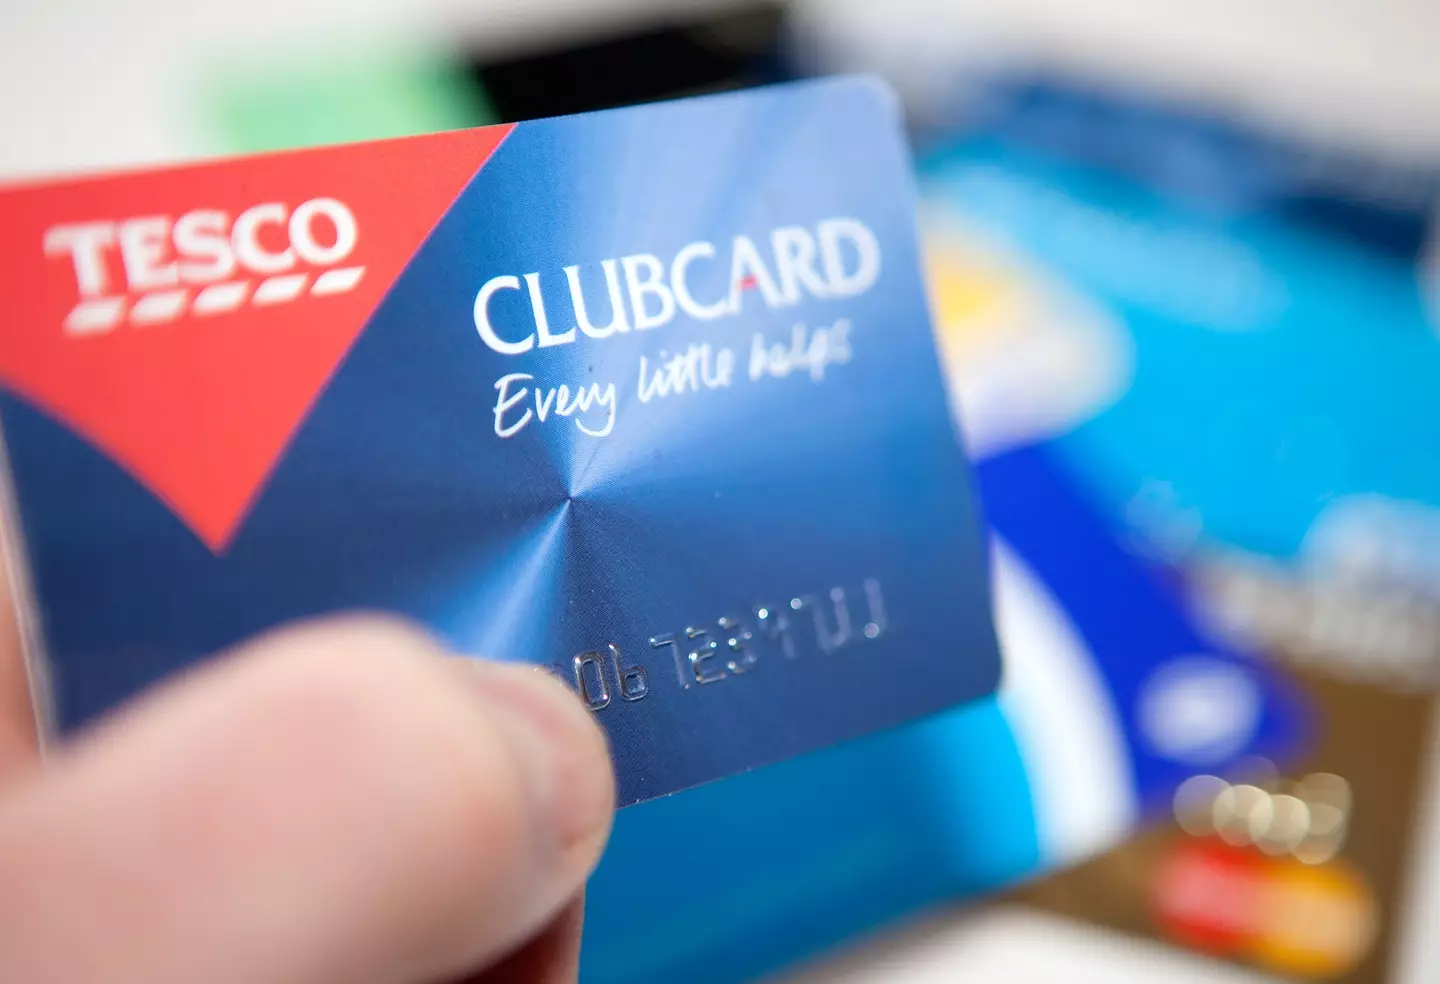 Tesco has issued an urgent warning to its Tesco Clubcard customers ahead of next week (